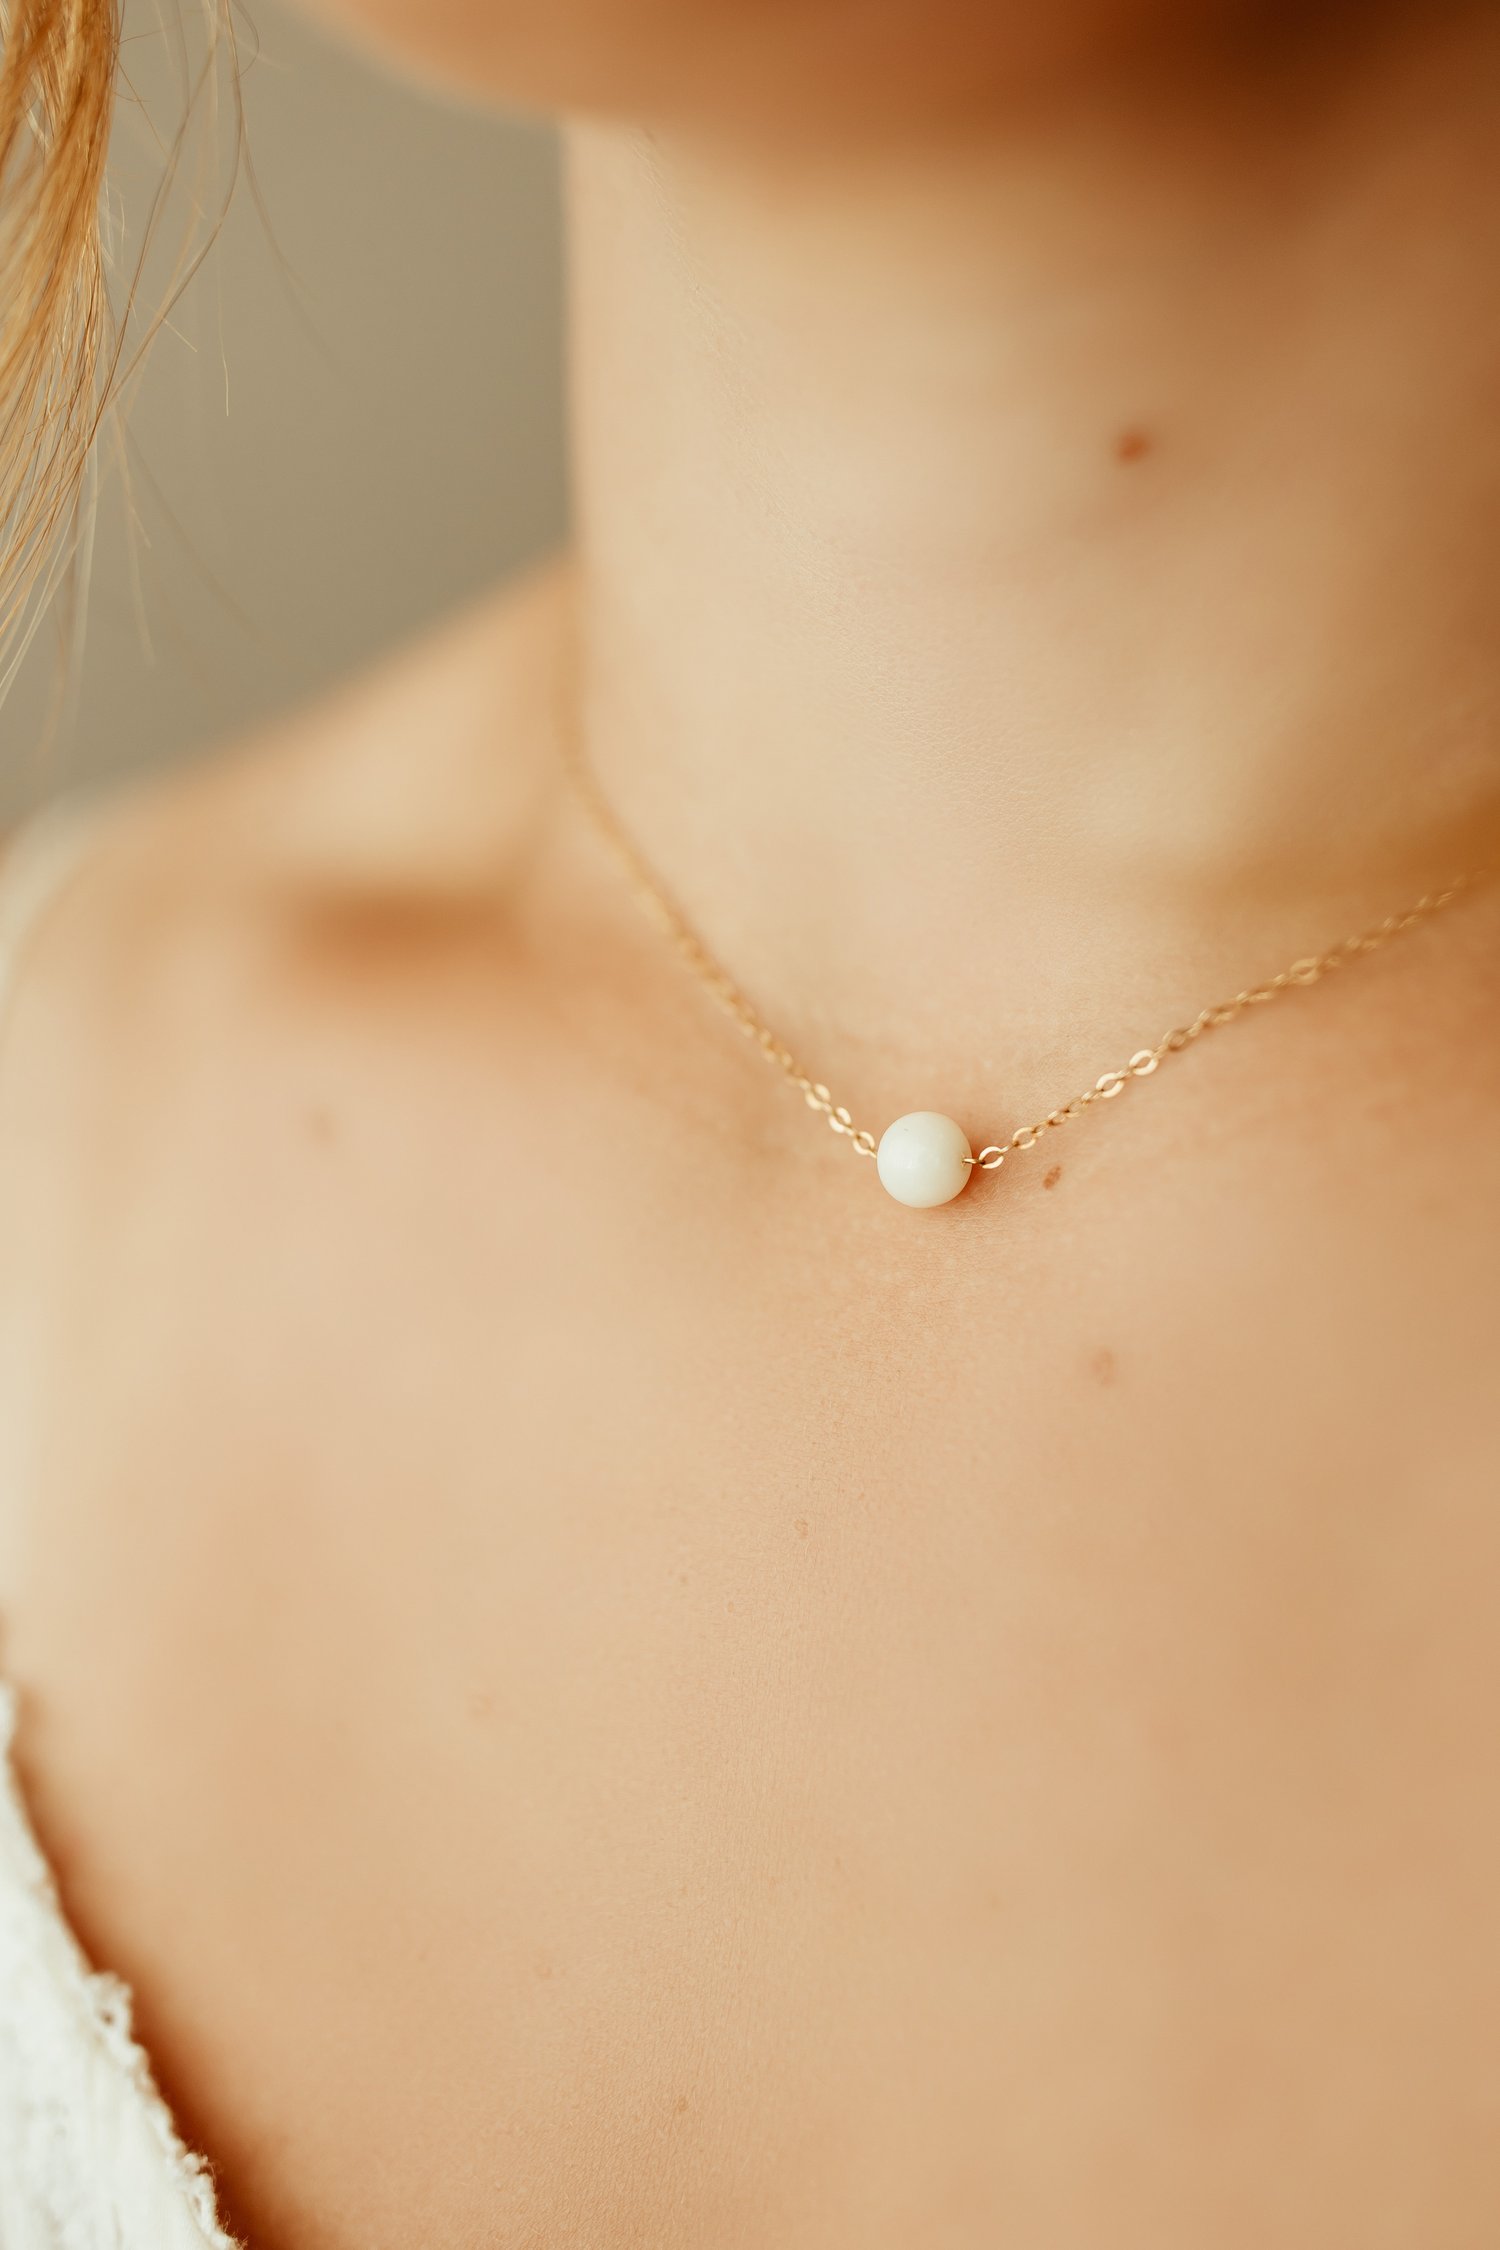 Milk + Honey — How to Make your Own Breastmilk Jewelry using our DIY Kit